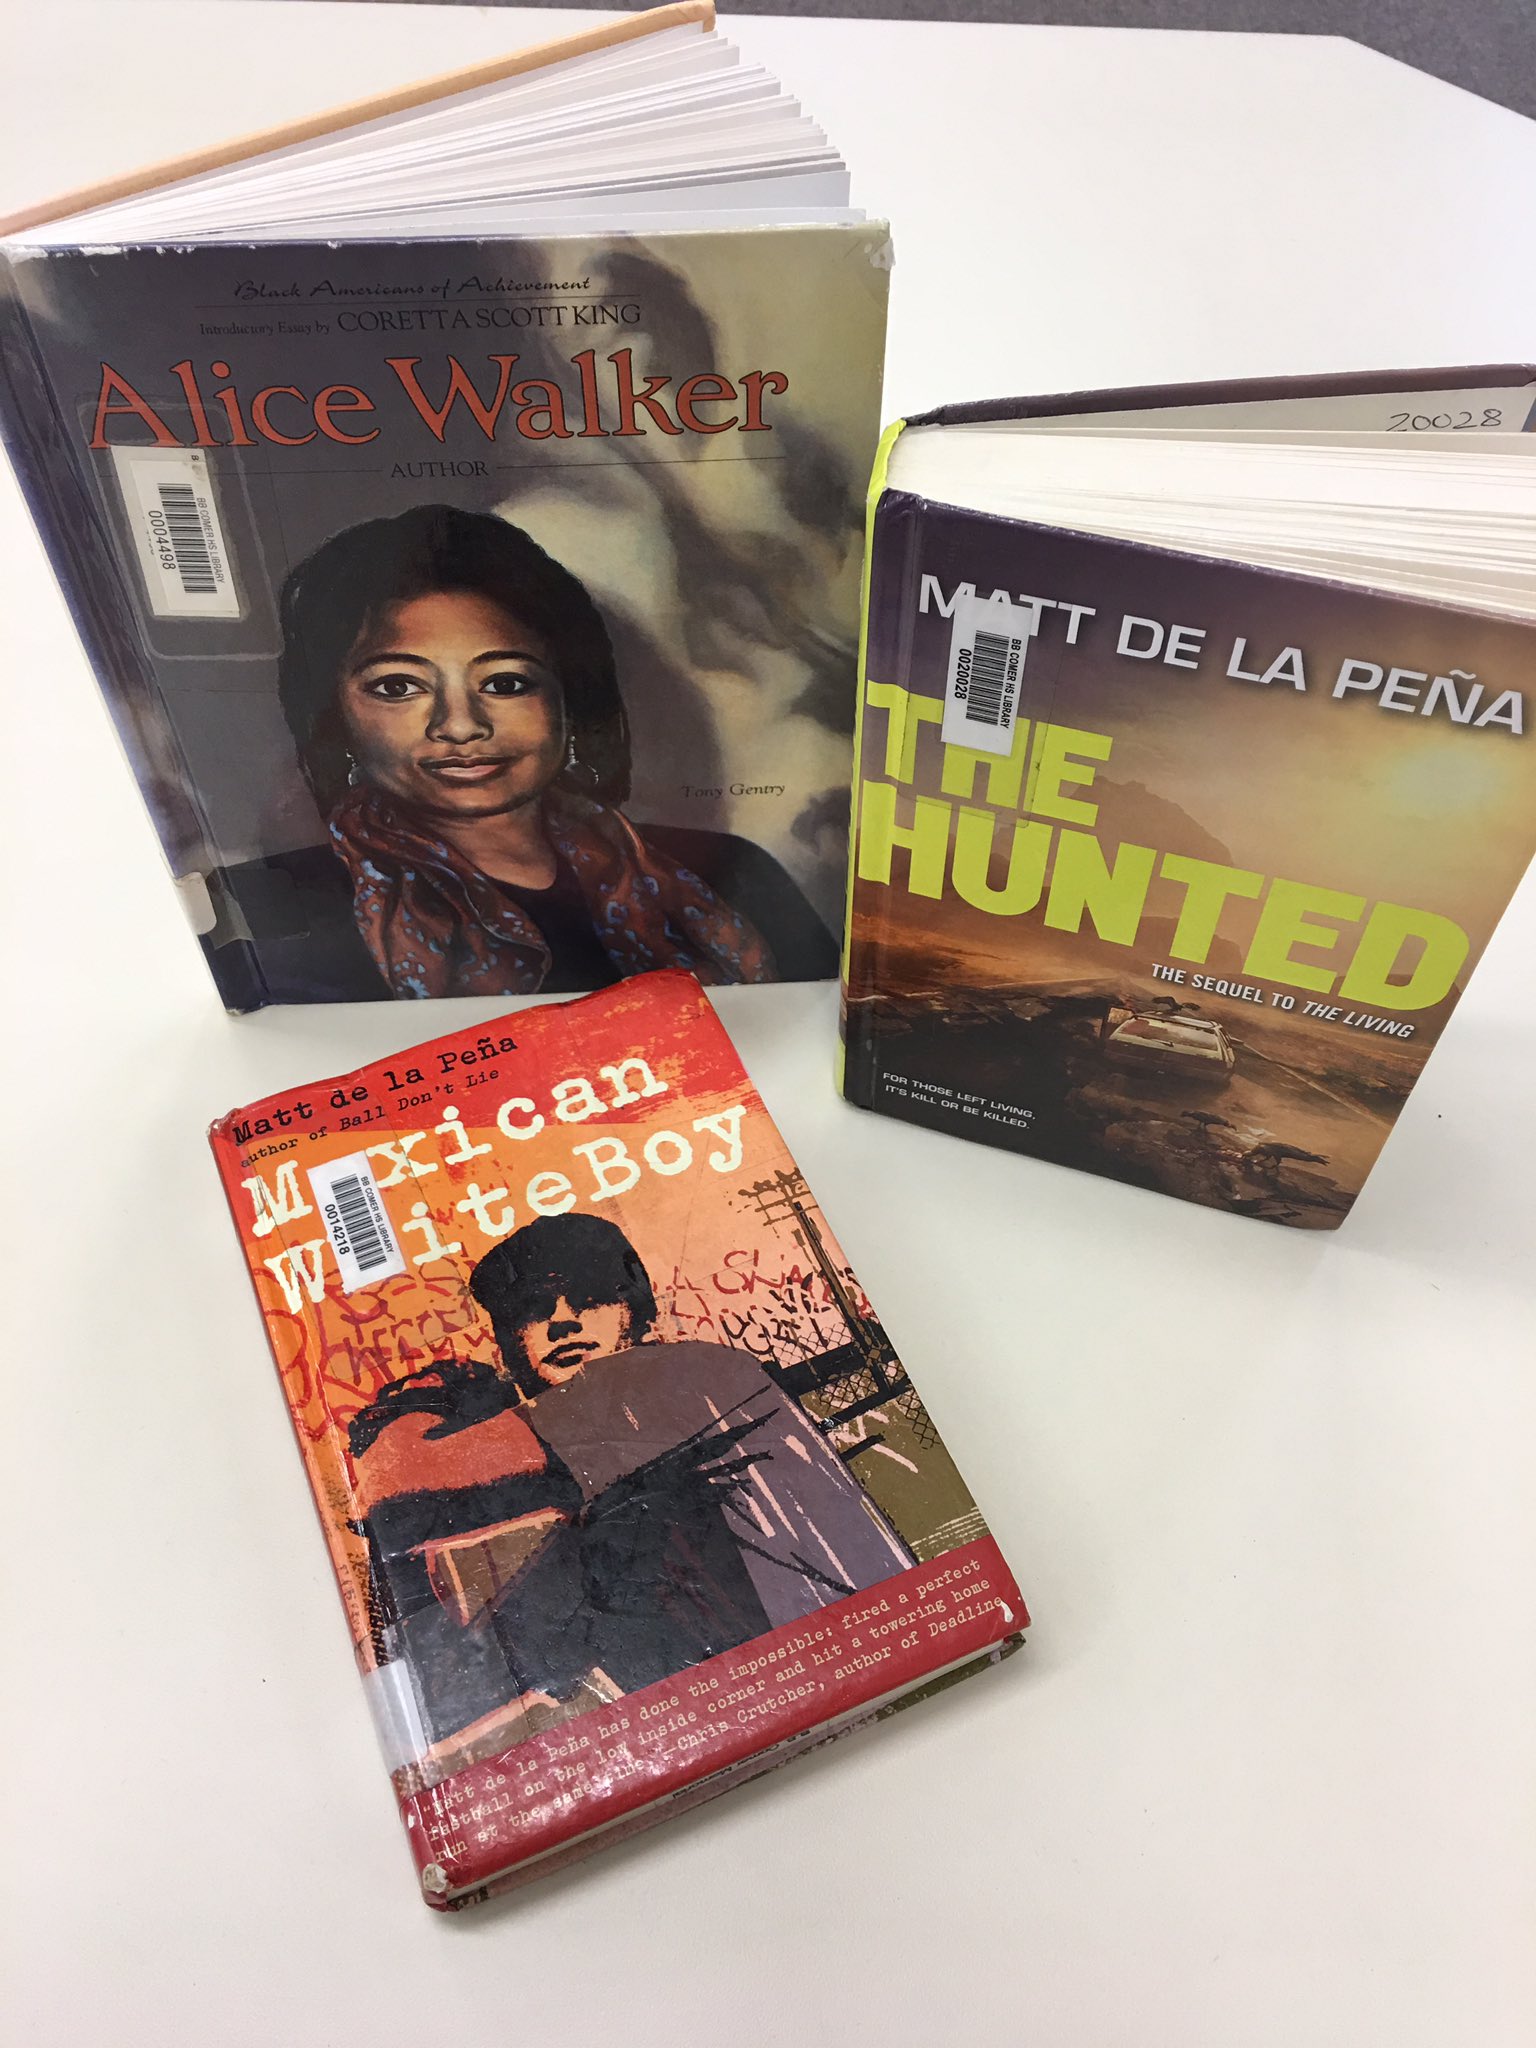 Happy birthday, Matt de la Pena & Alice Walker! Come by the library to check out their works! 